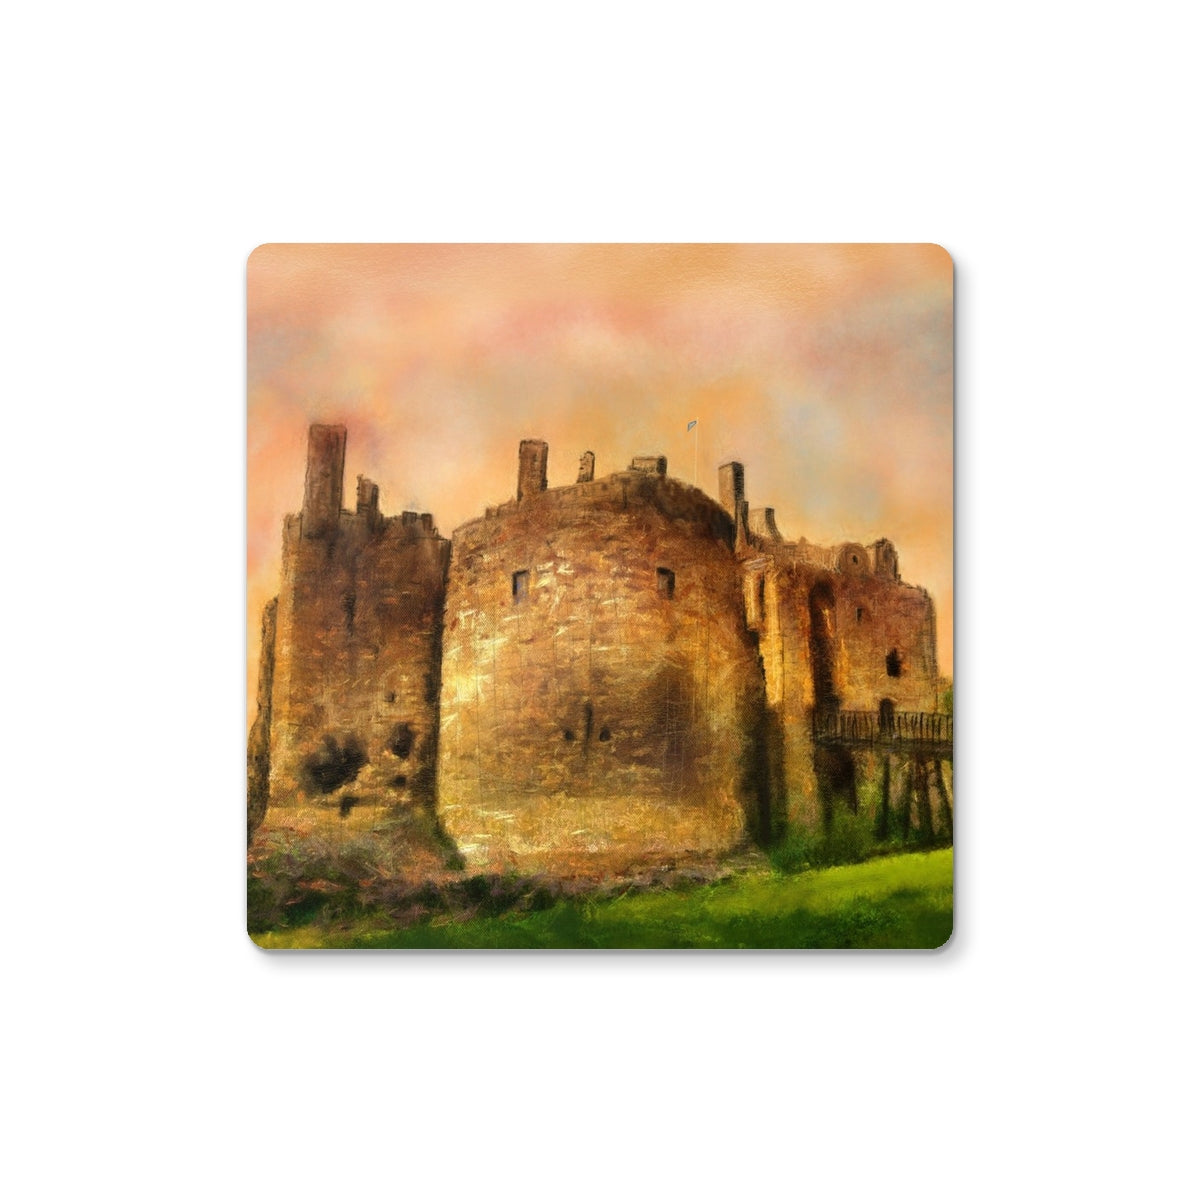 Dirleton Castle Art Gifts Coaster-Coasters-Historic & Iconic Scotland Art Gallery-Single Coaster-Paintings, Prints, Homeware, Art Gifts From Scotland By Scottish Artist Kevin Hunter